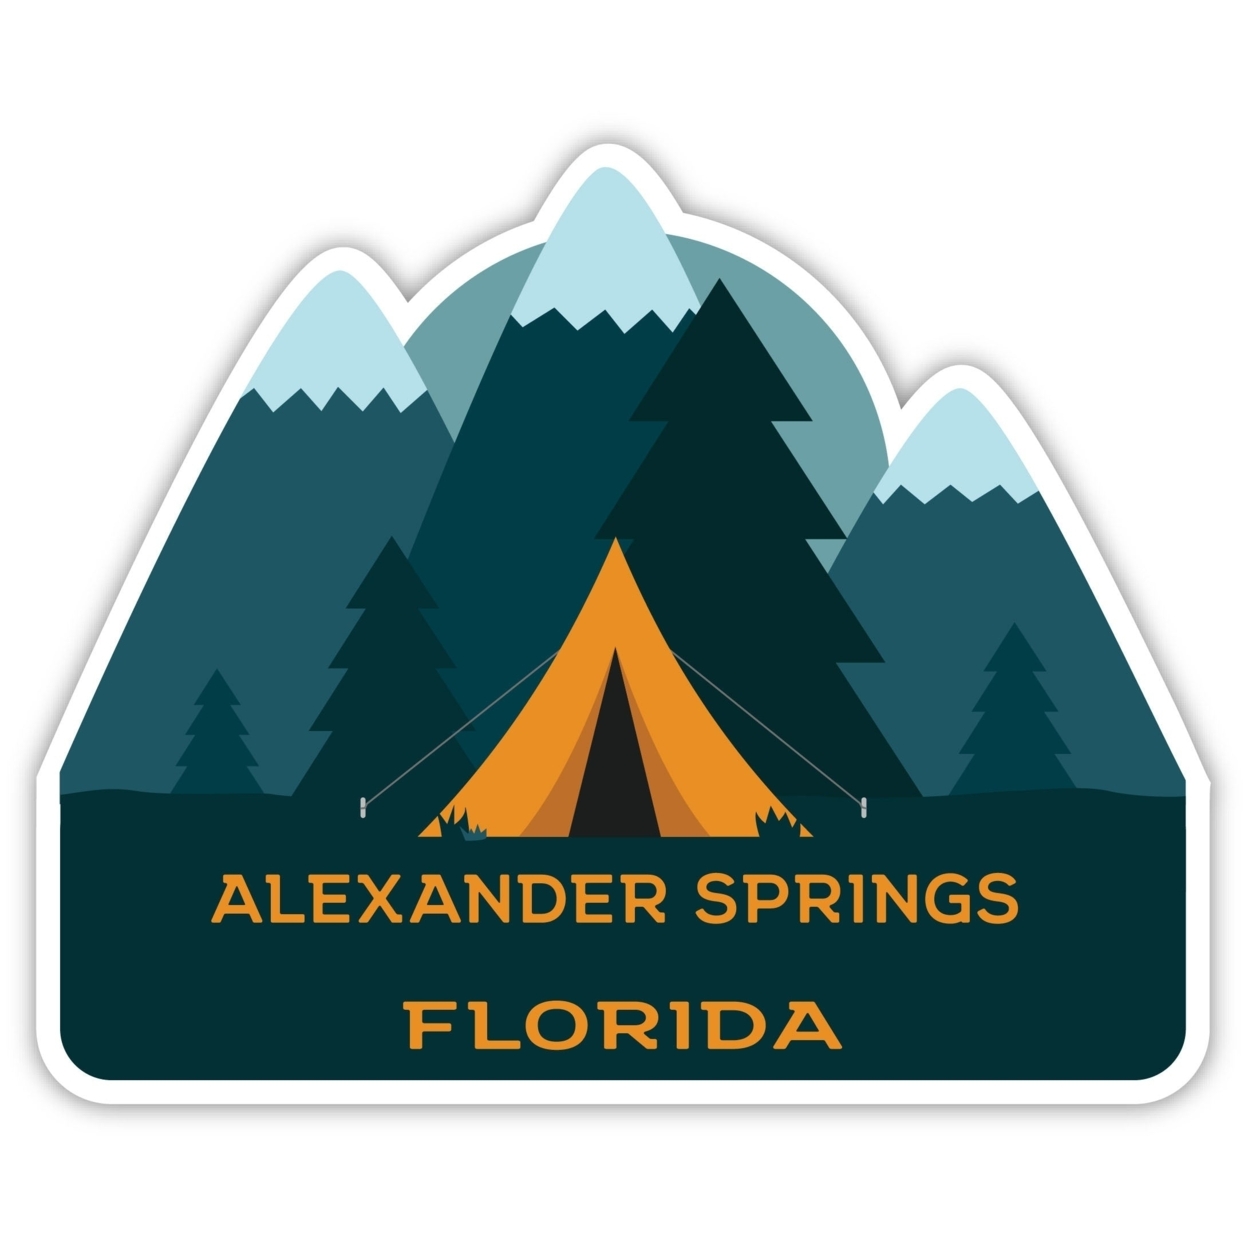 Alexander Springs Florida Souvenir Decorative Stickers (Choose Theme And Size) - 4-Pack, 6-Inch, Bear